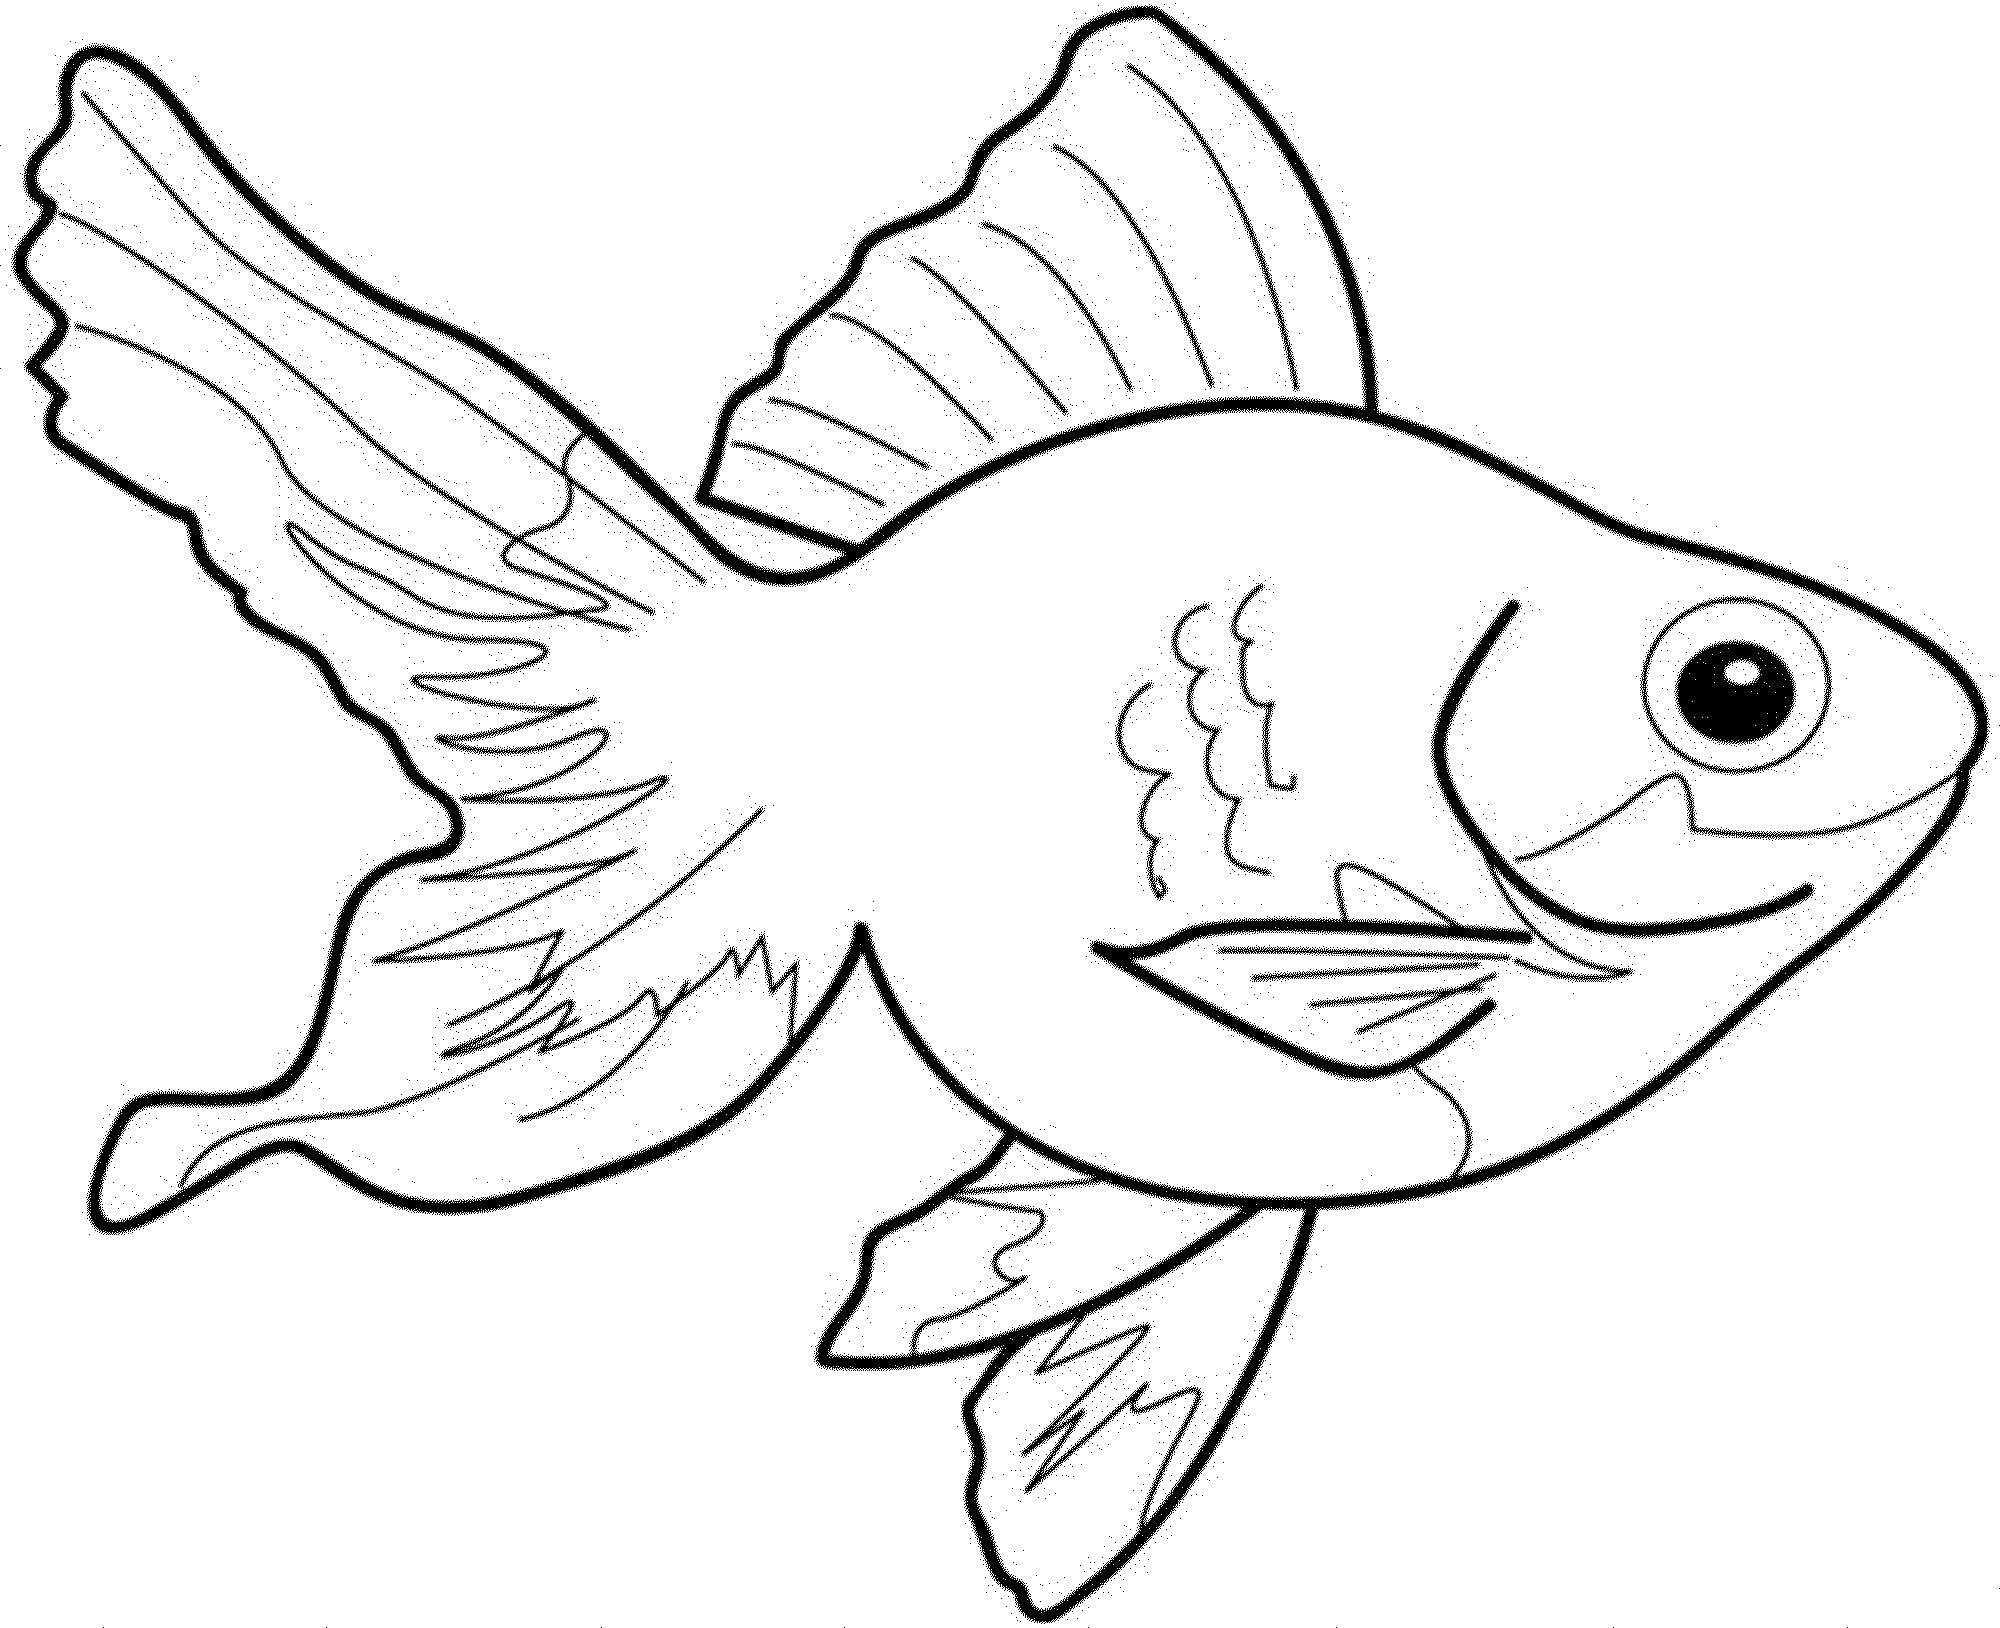 Coloring Goldfish. Category fish. Tags:  Underwater world, Golden fish.